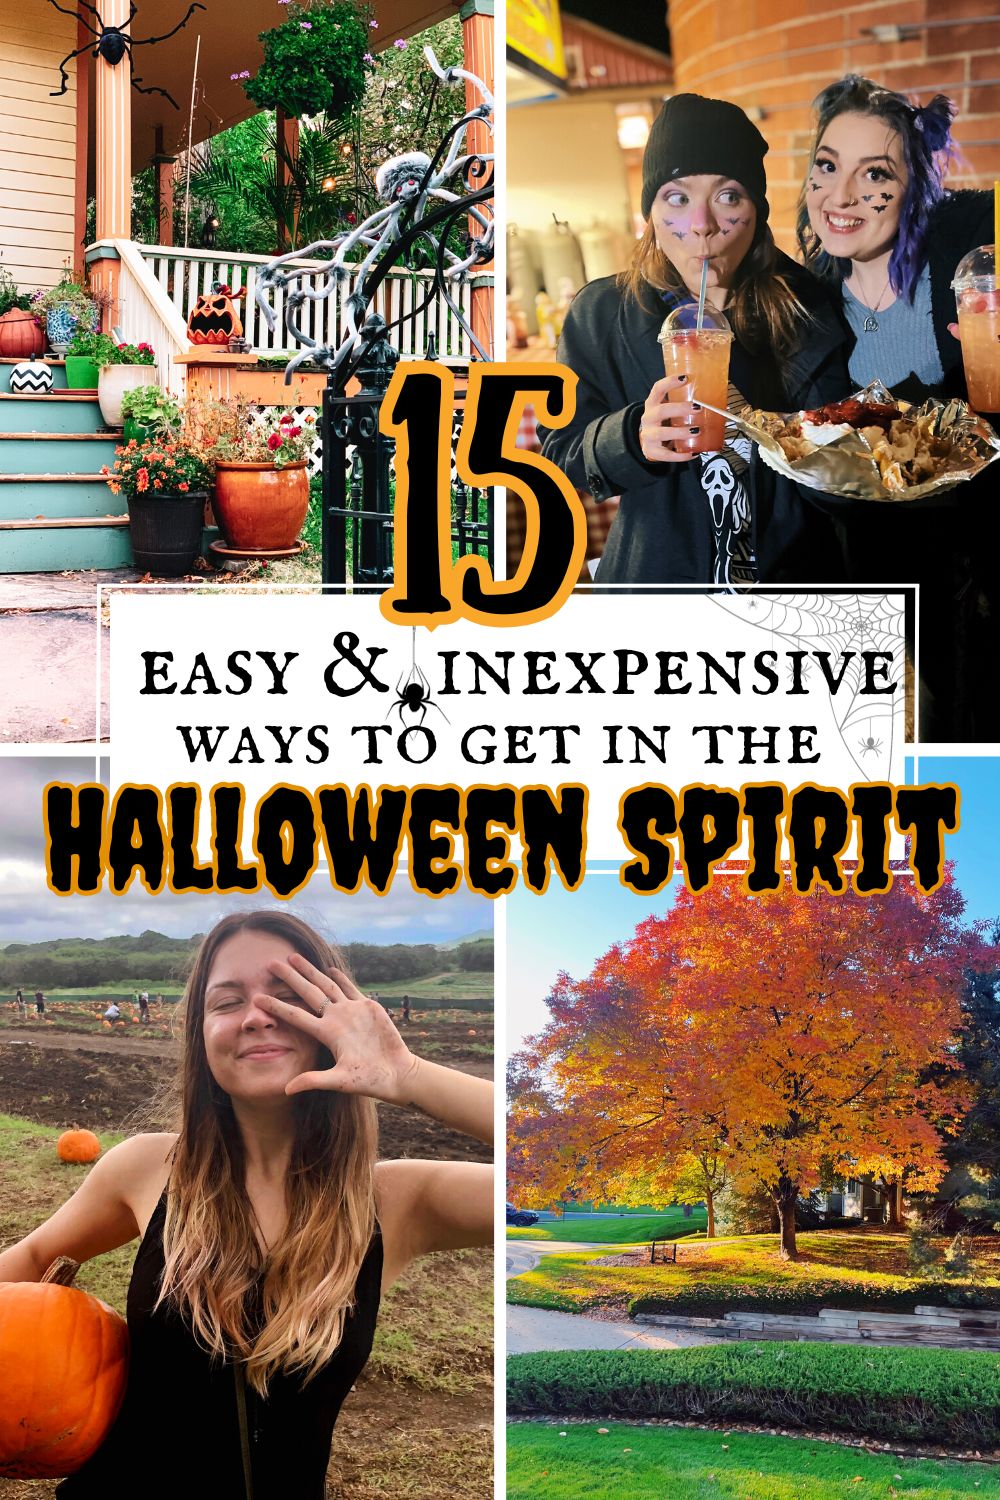 15 Easy and Inexpensive Ways to Get in the Halloween Spirit